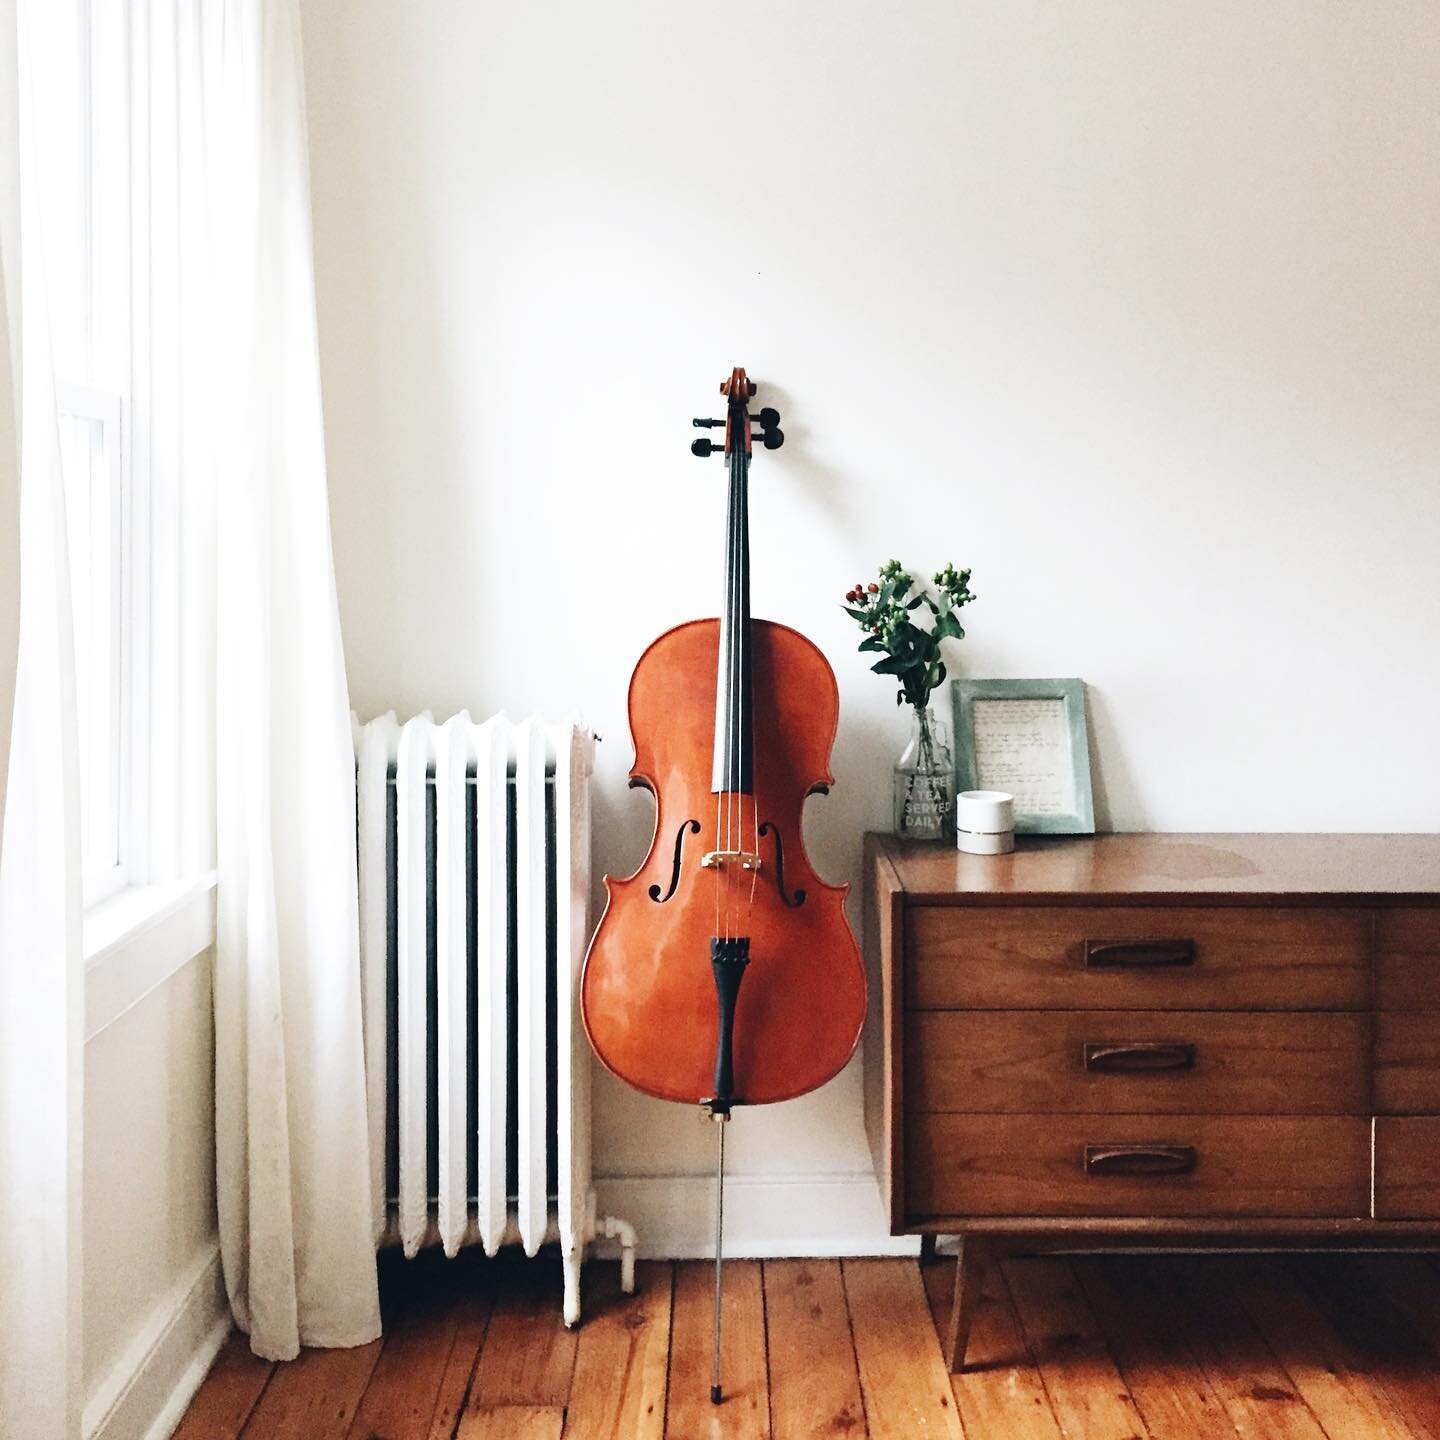 At forty-one minutes past nine, I closed my computer and gave up on the post I tried to write about fumbling through cello finger positions and scratching notes on the side of sheet music in the pursuit of beauty for the soul. No matter how I wrote, 